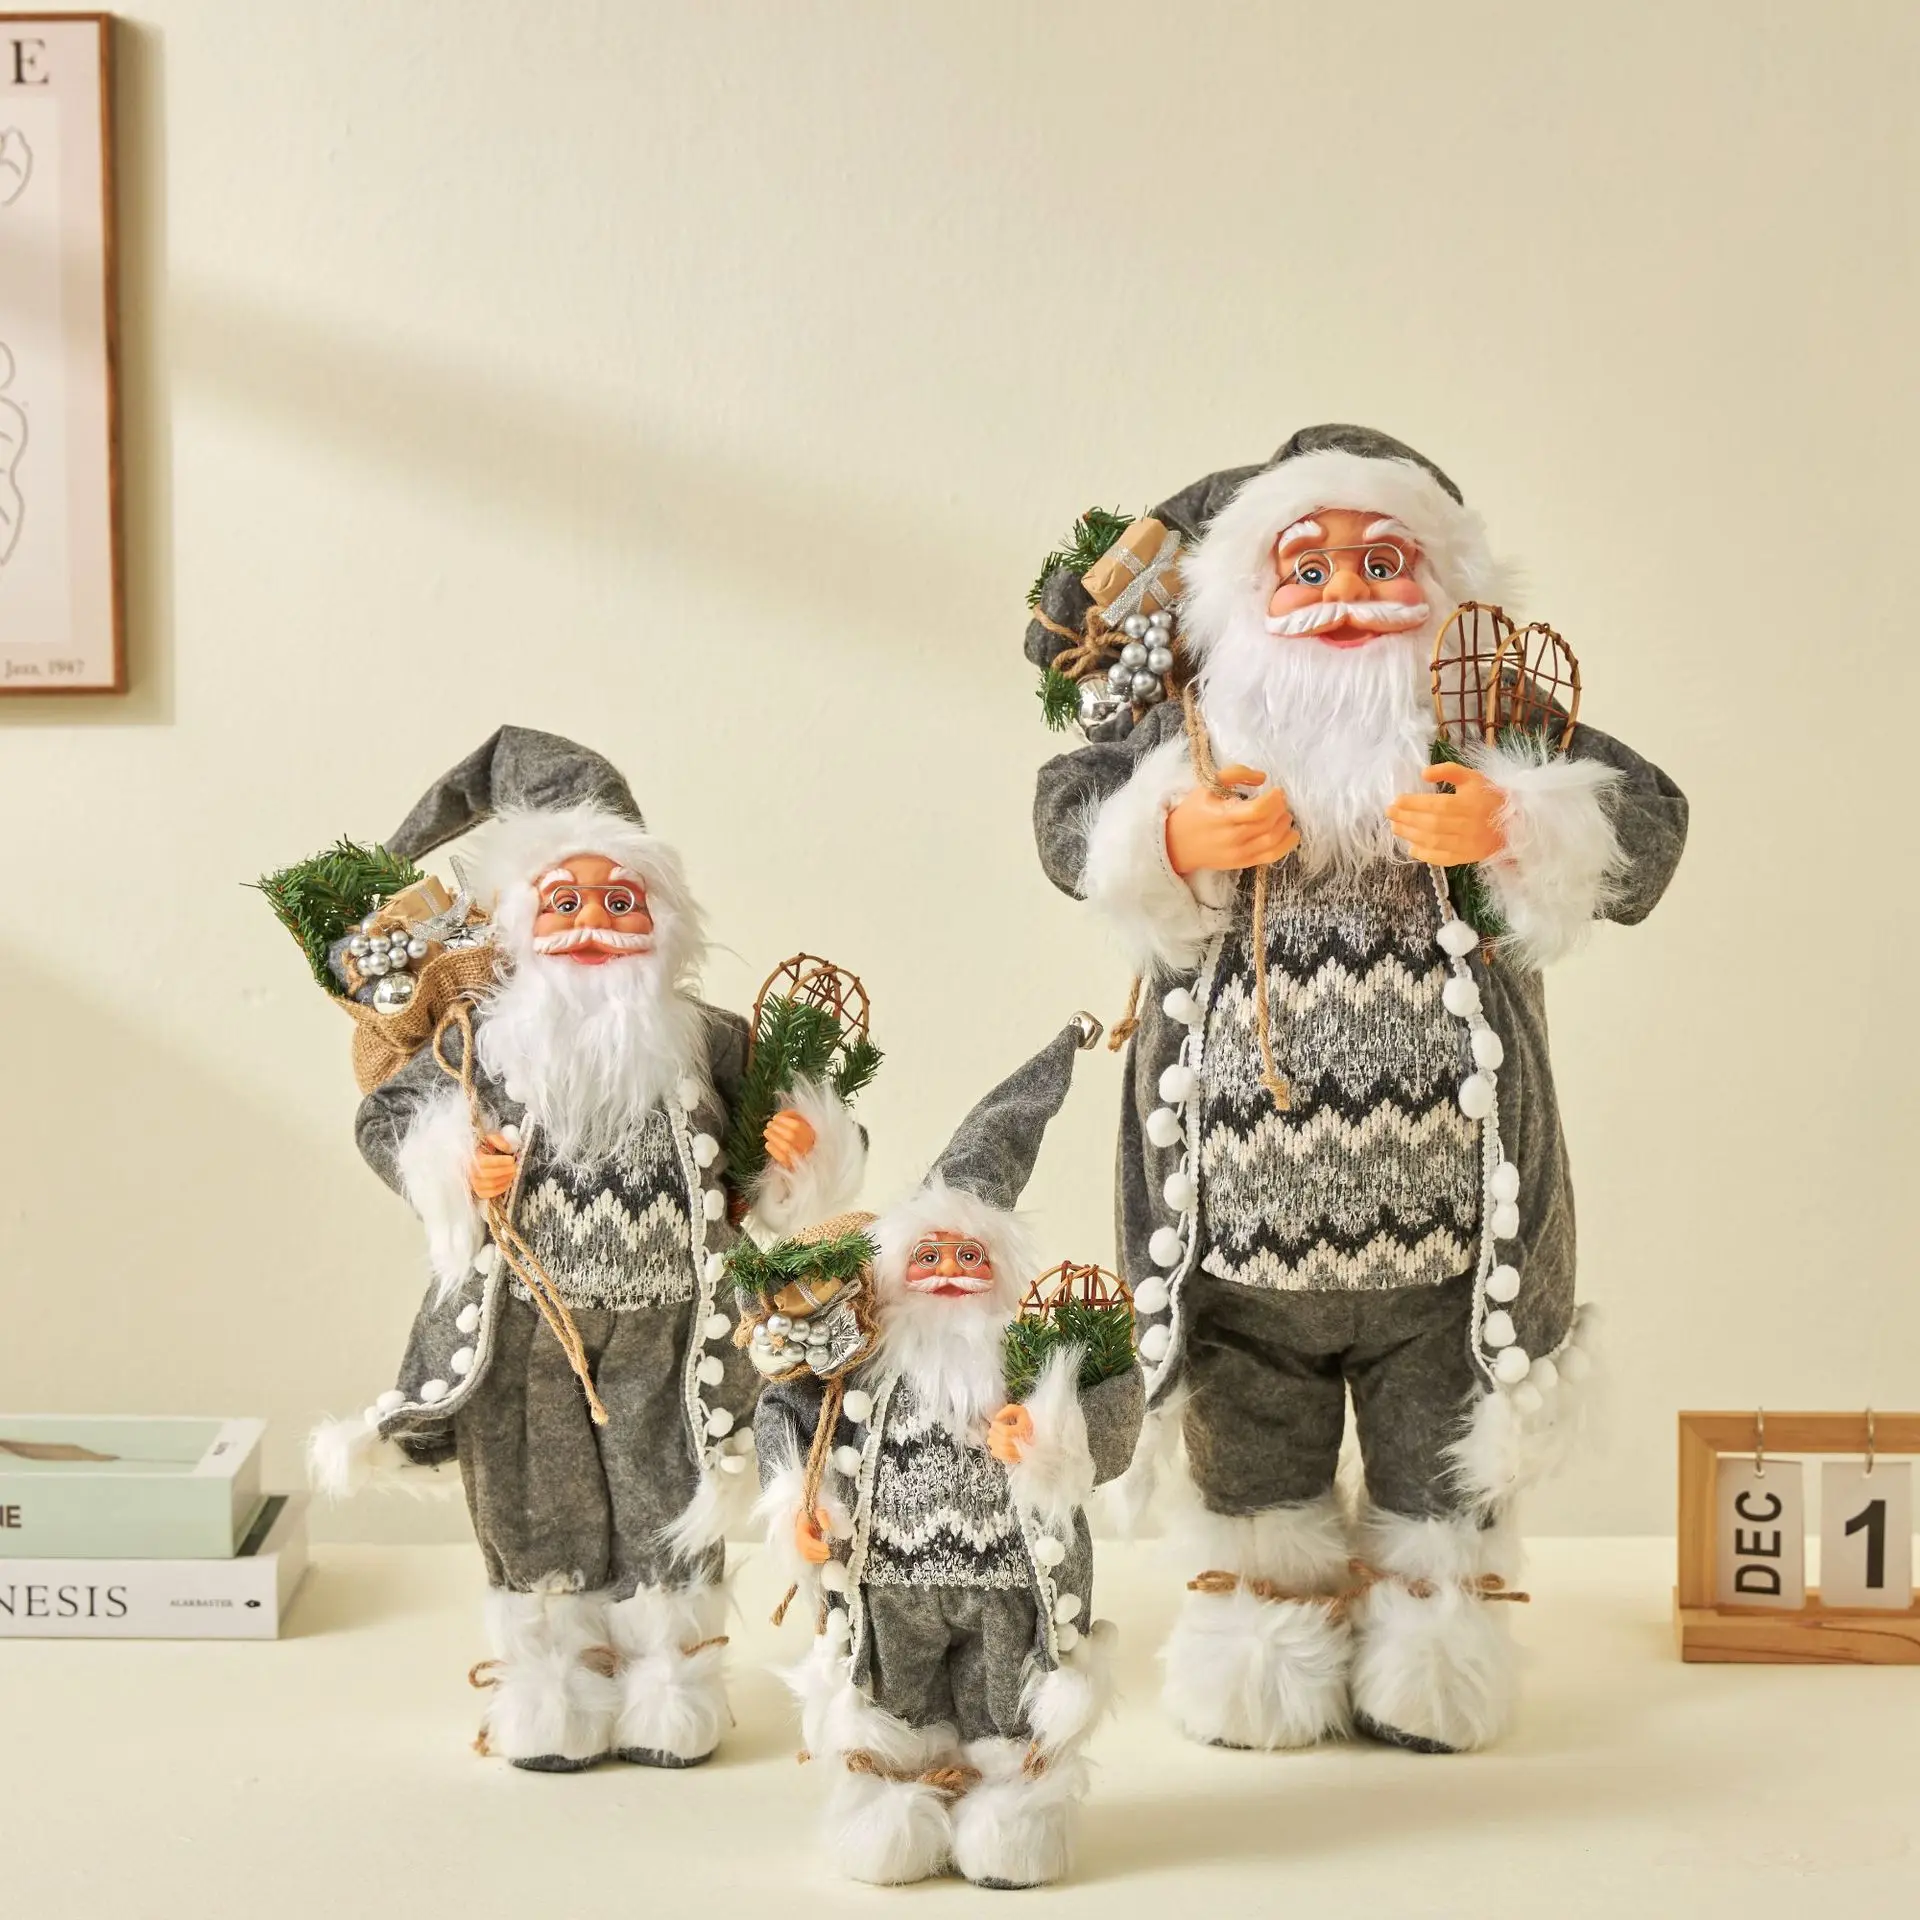 

Standing Santa Doll Toy Figure Christmas Decorative Home Party Antique Home Décor Traditional Showpiece Figurines for Home Decor